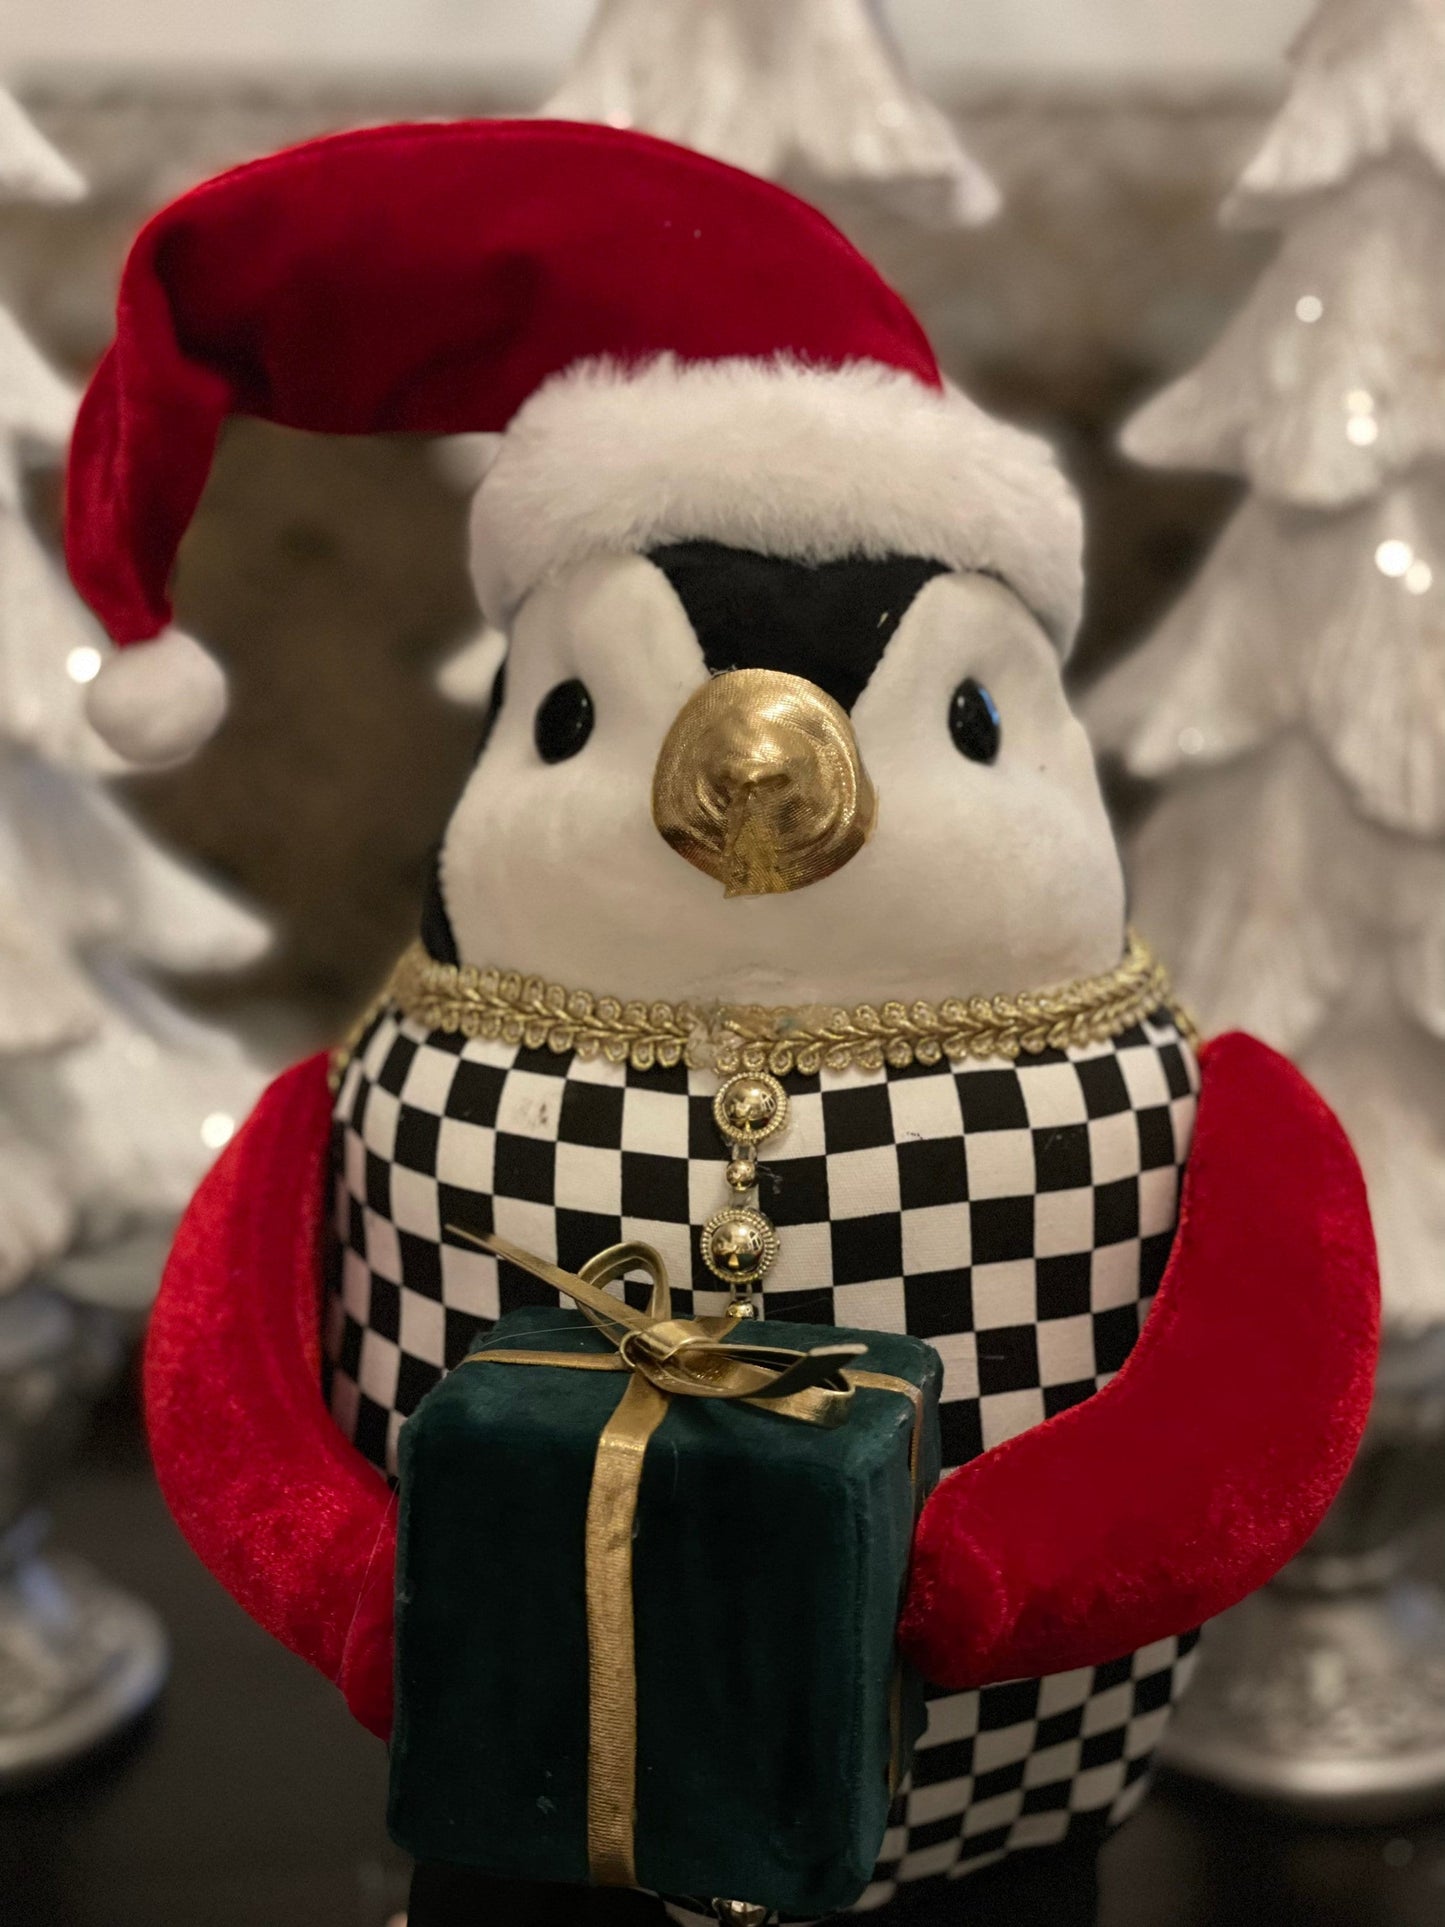 13” H x 8 W. Penguin red checkered ornament. Green, red, white and black. Christmas.